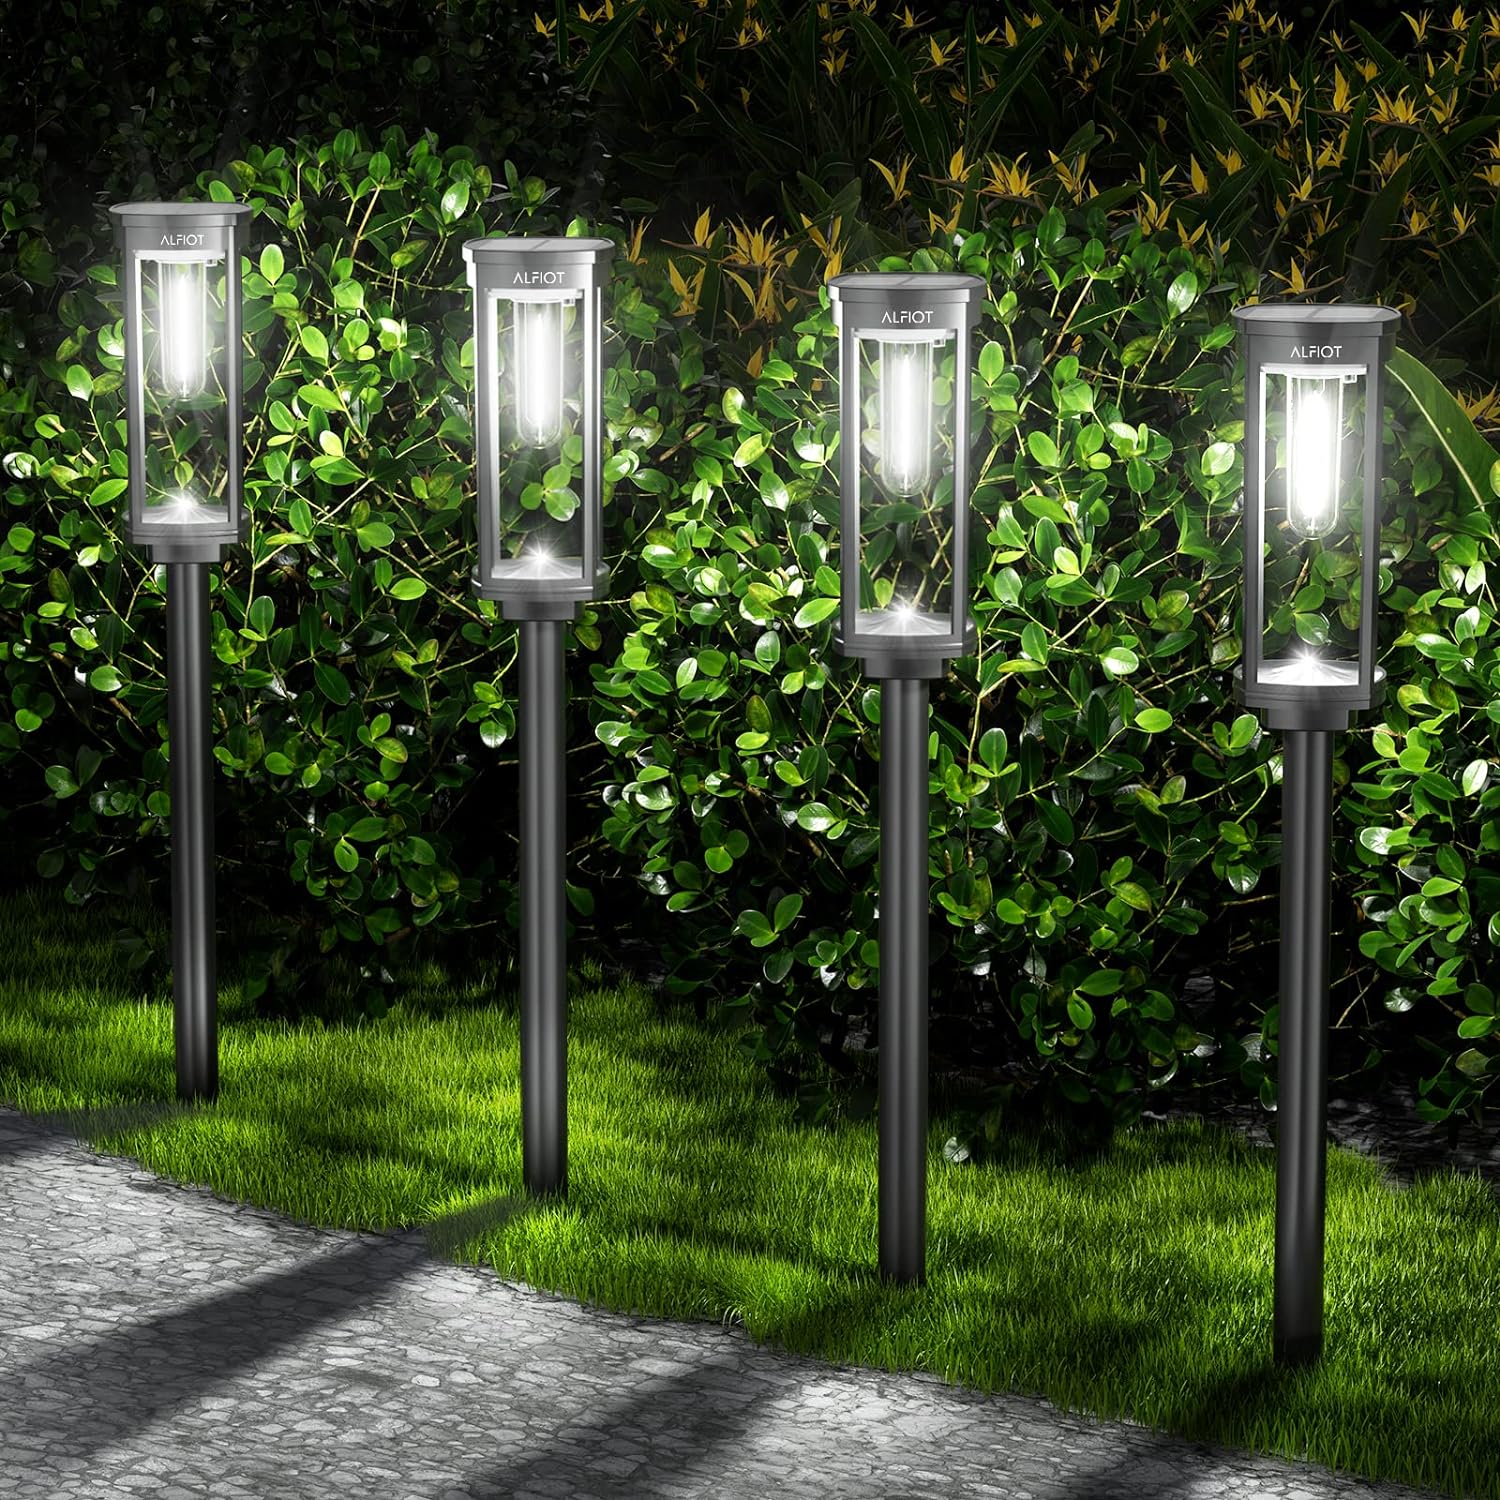 ALFIOT Solar Pathway Lights Waterproof 8 Pack Upgraded Walkway Landscape Outdoor Driveway Auto On/Off Lights for Yard Lawn Patio (Cool White)